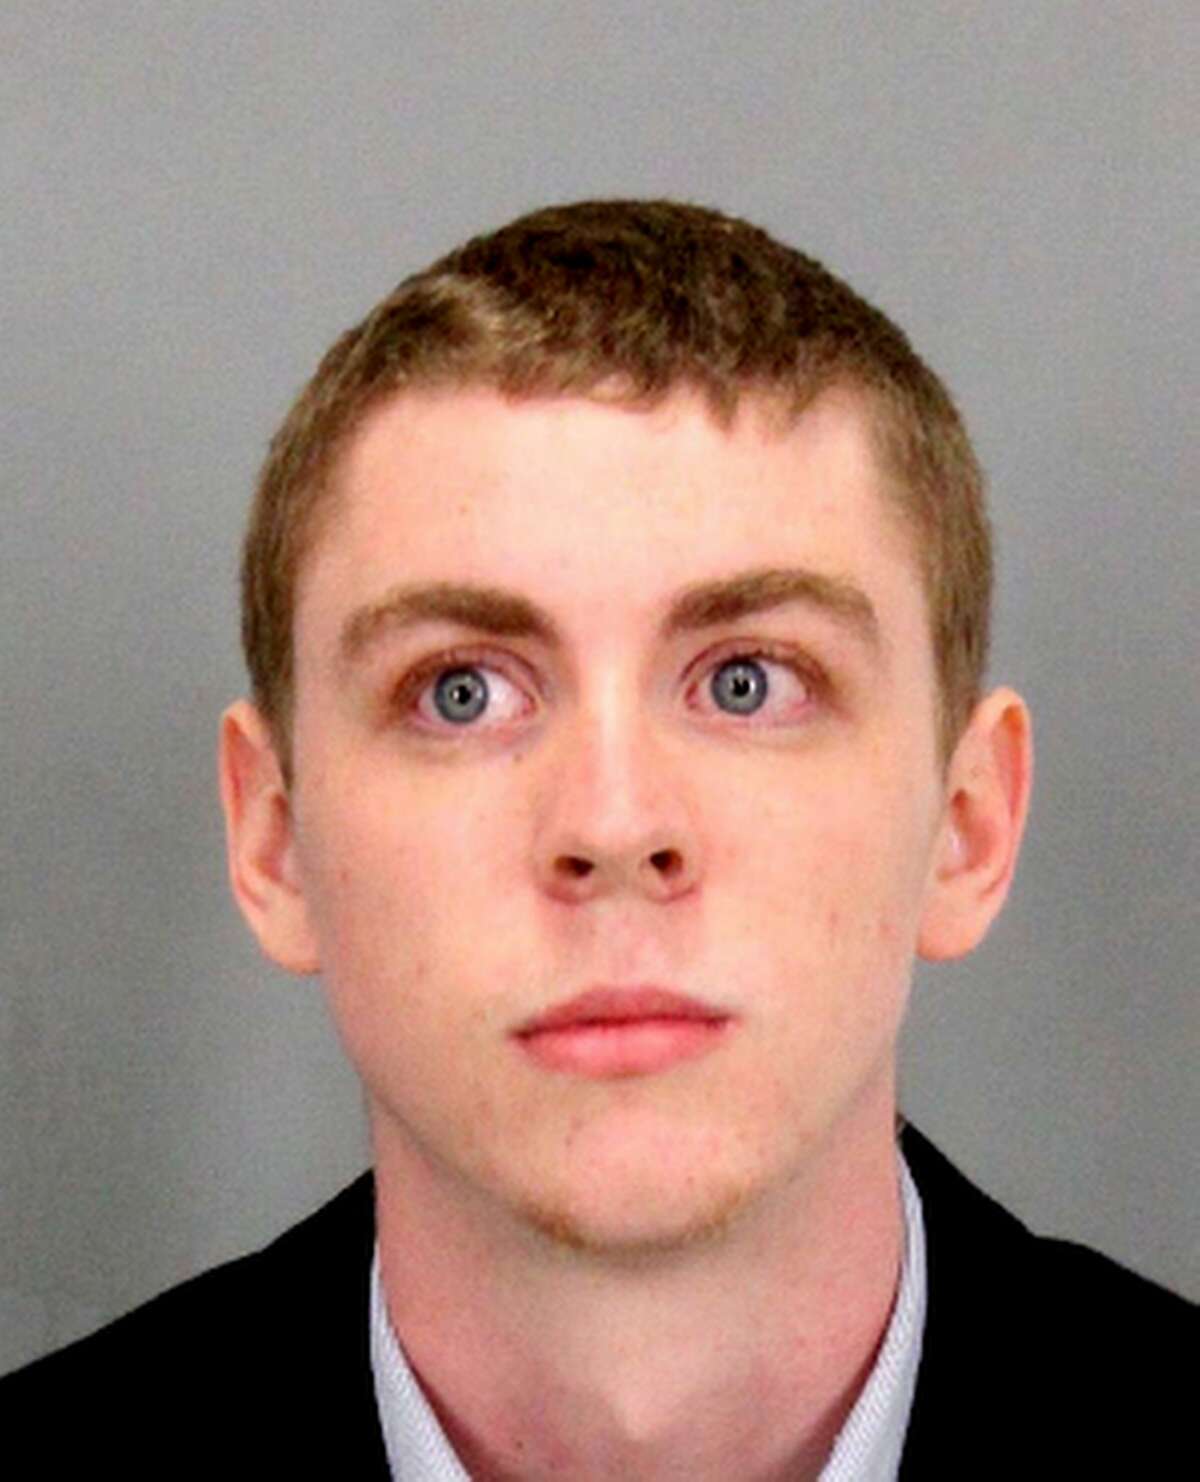 This undated booking file photo provided by Santa Clara County Sheriff shows Brock Turner, a former Stanford University swimmer, who received six months in jail for sexually assaulting an unconscious woman. With the jail sentence Turner received last week generating widespread publicity, some parents are using the case to talk with their own children about sexual misconduct, binge drinking, personal responsibility and other topics.